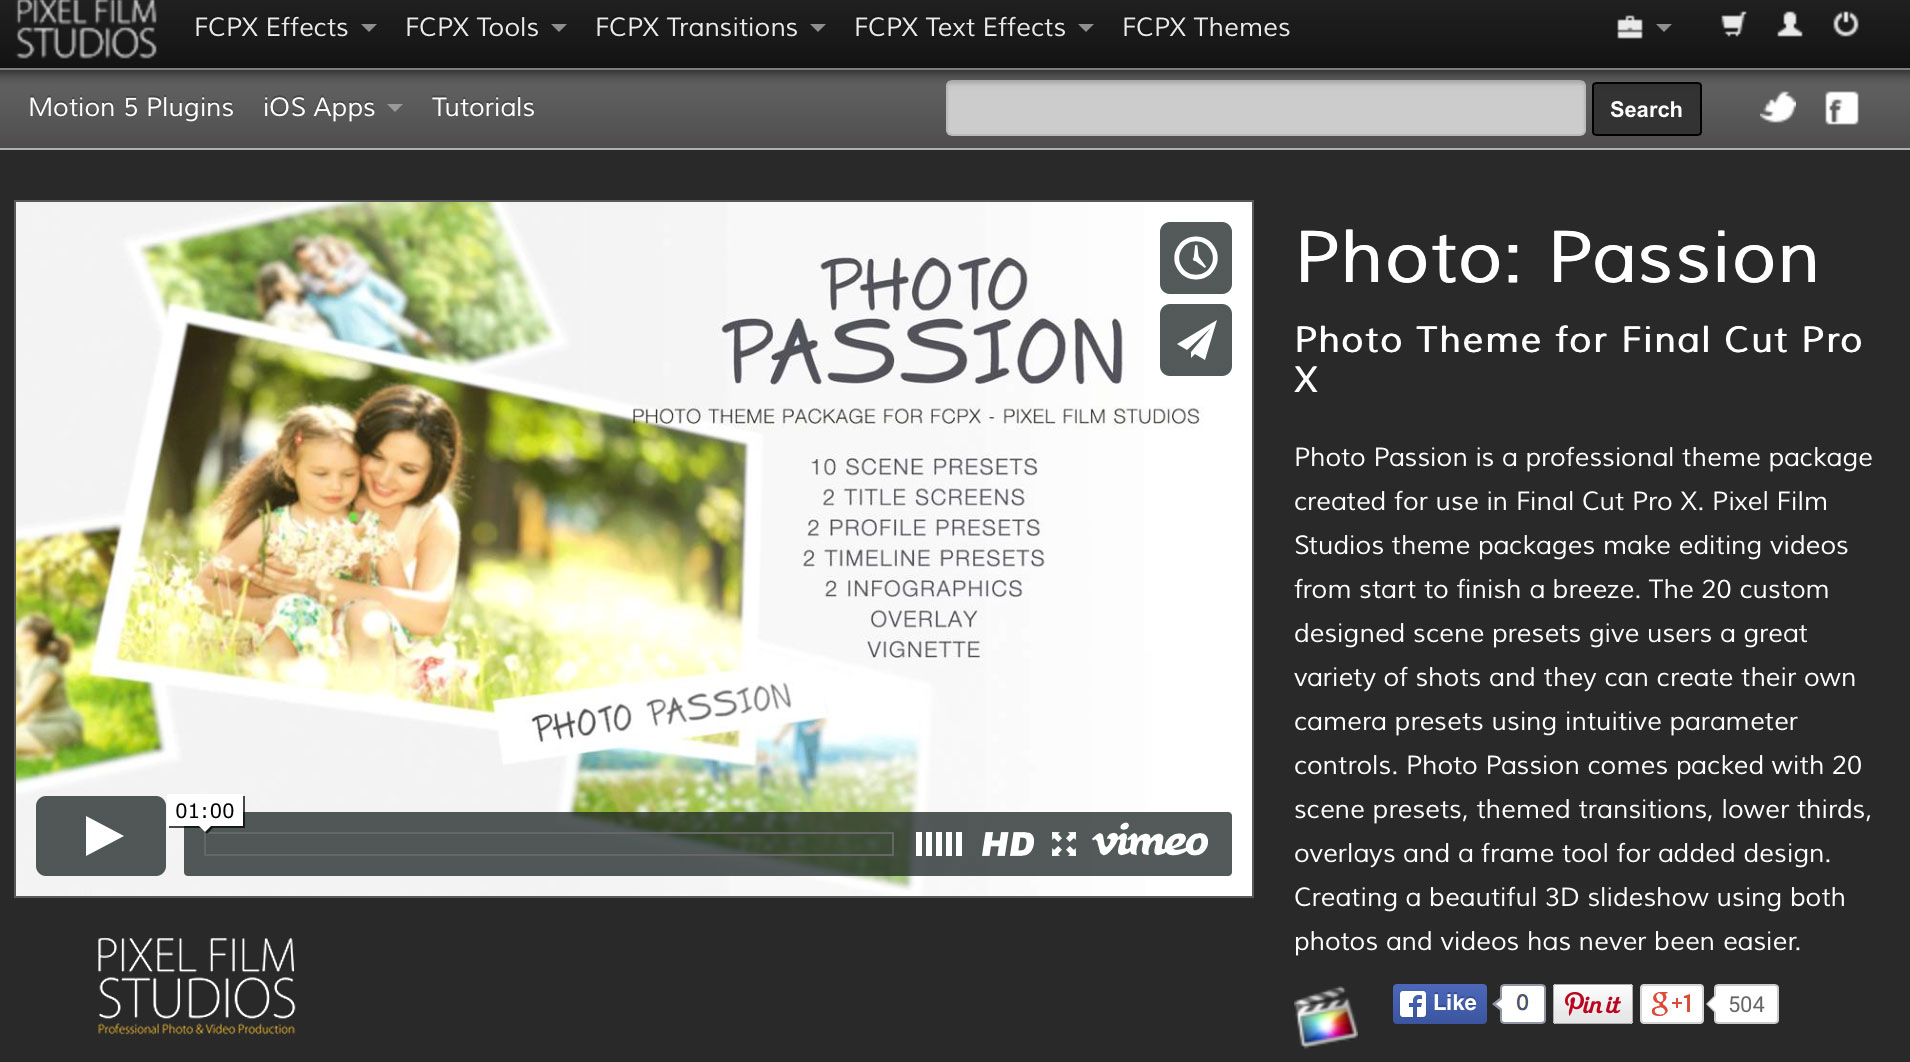 FCPX Photo Passion Plugin from Pixel Film Studios.